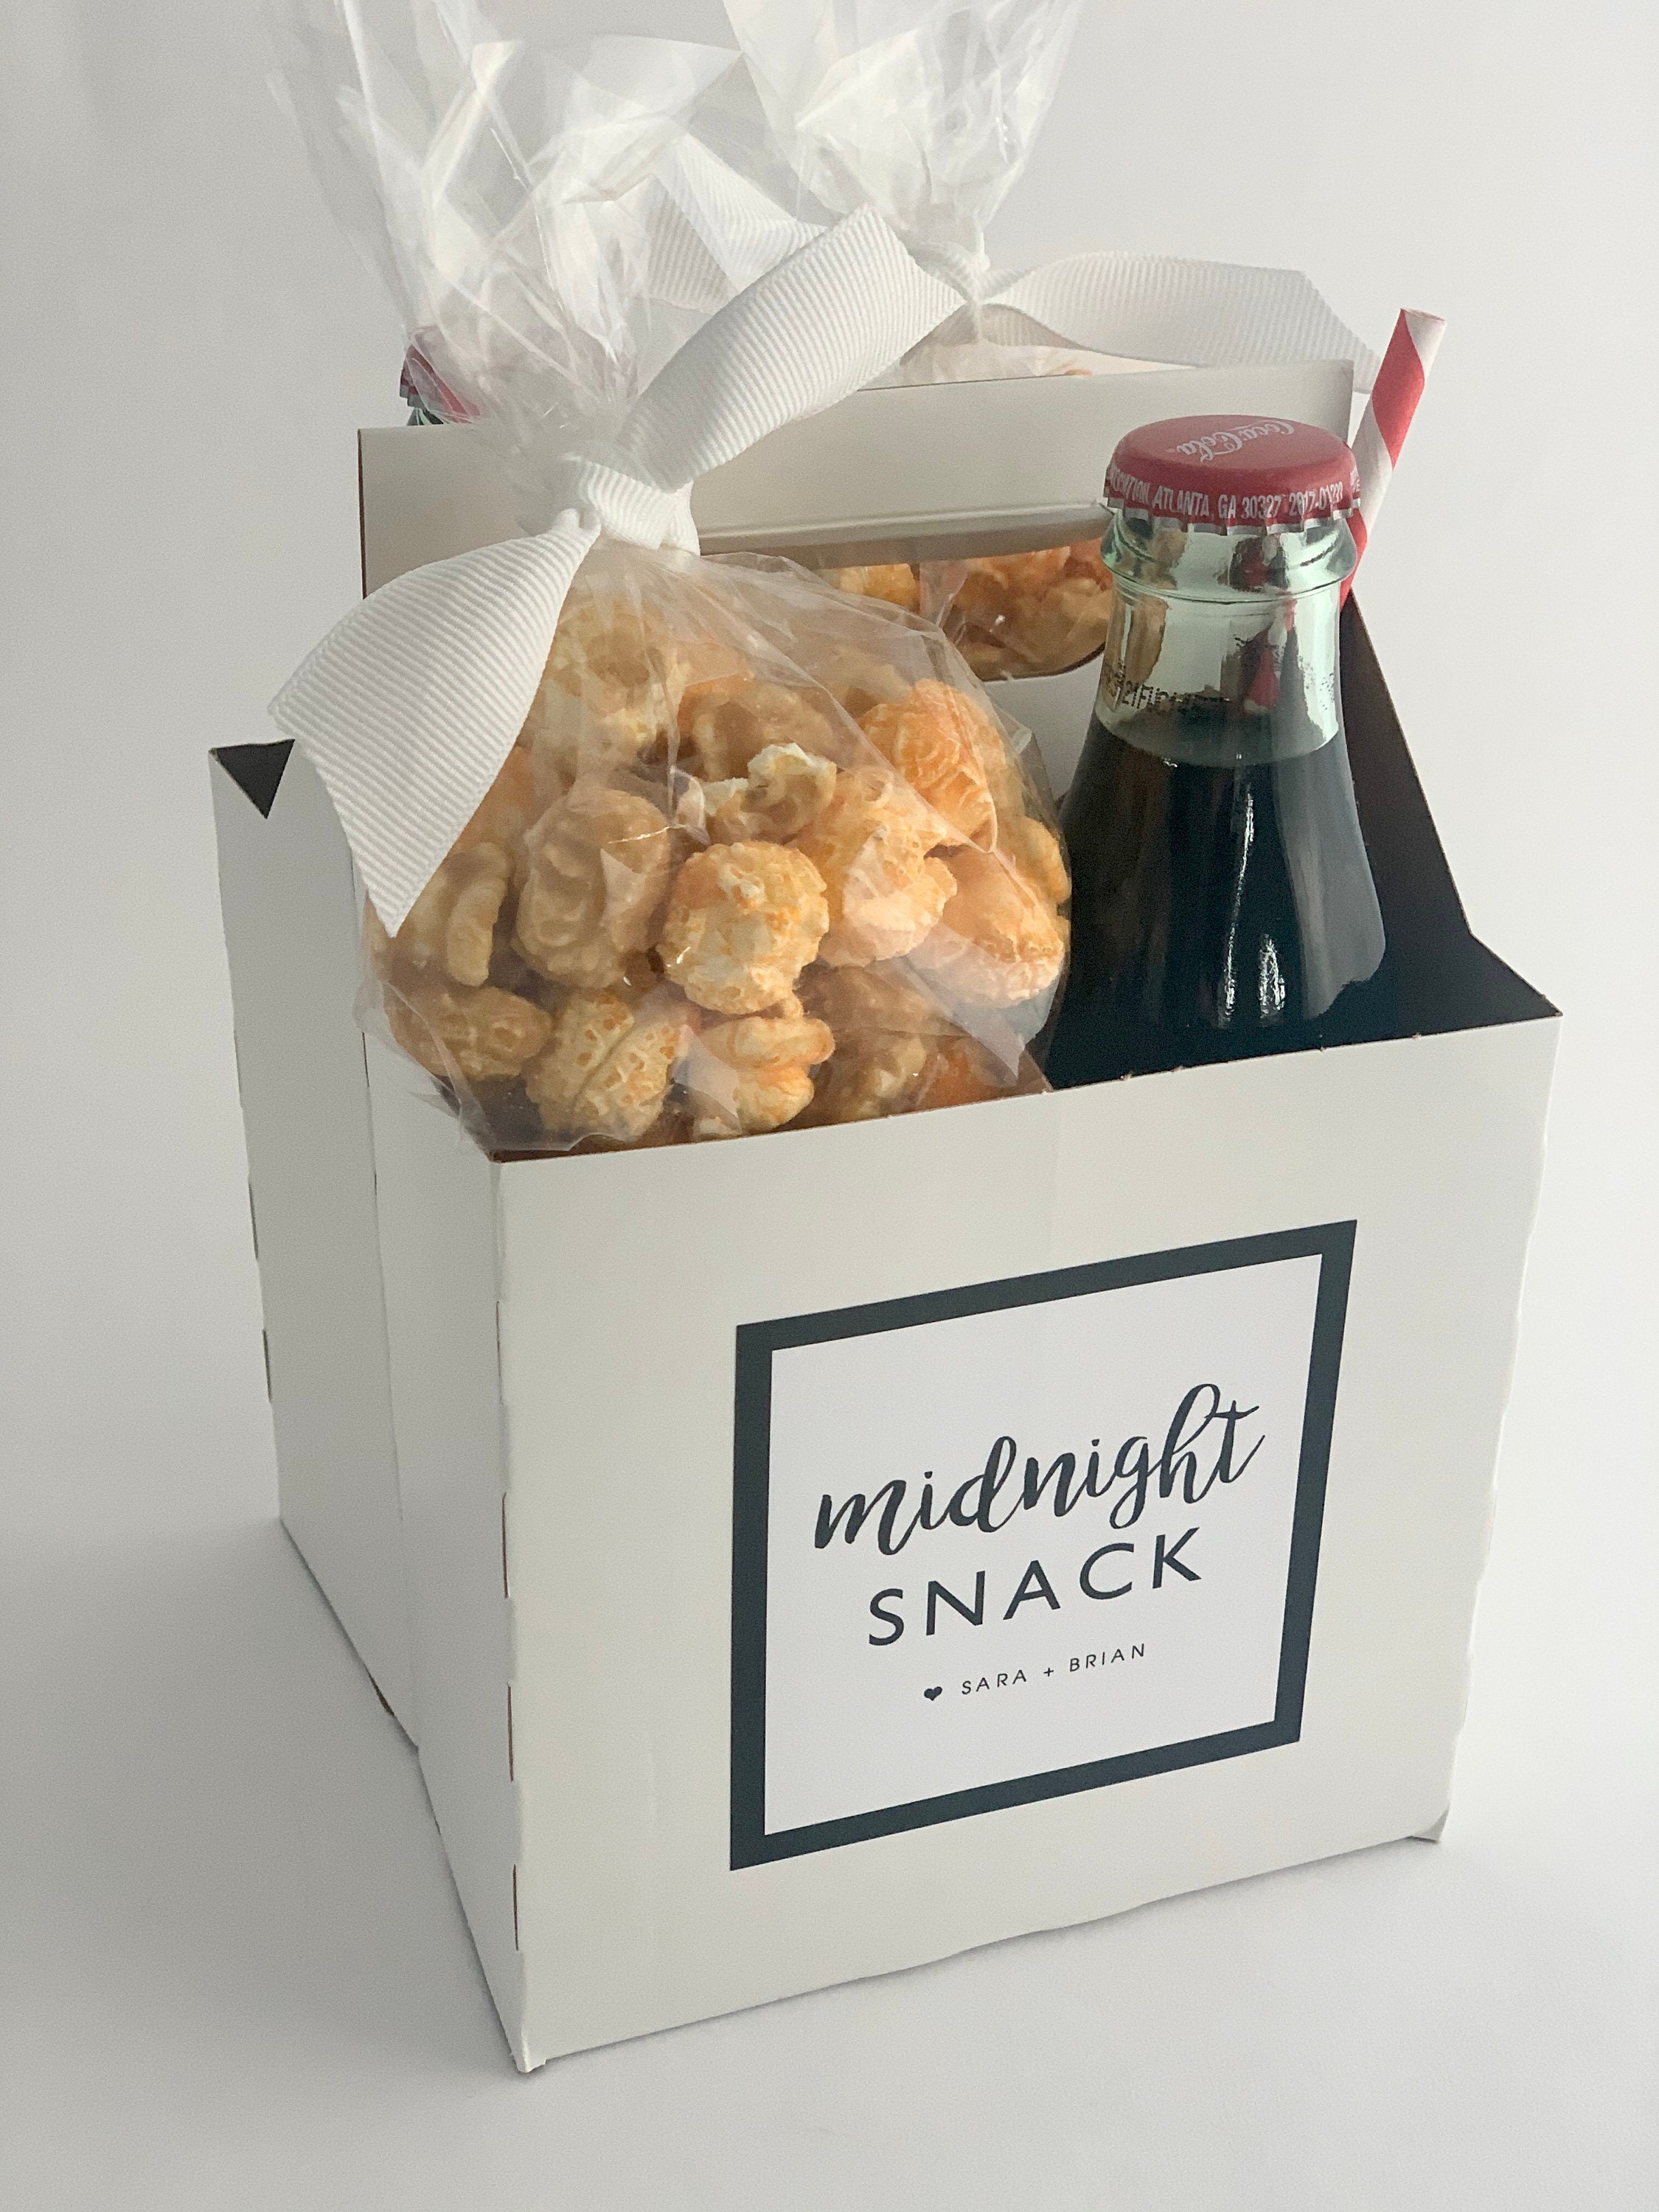 Set of 10 Midnight Snack Wedding Favor Drink and Snack Carrier